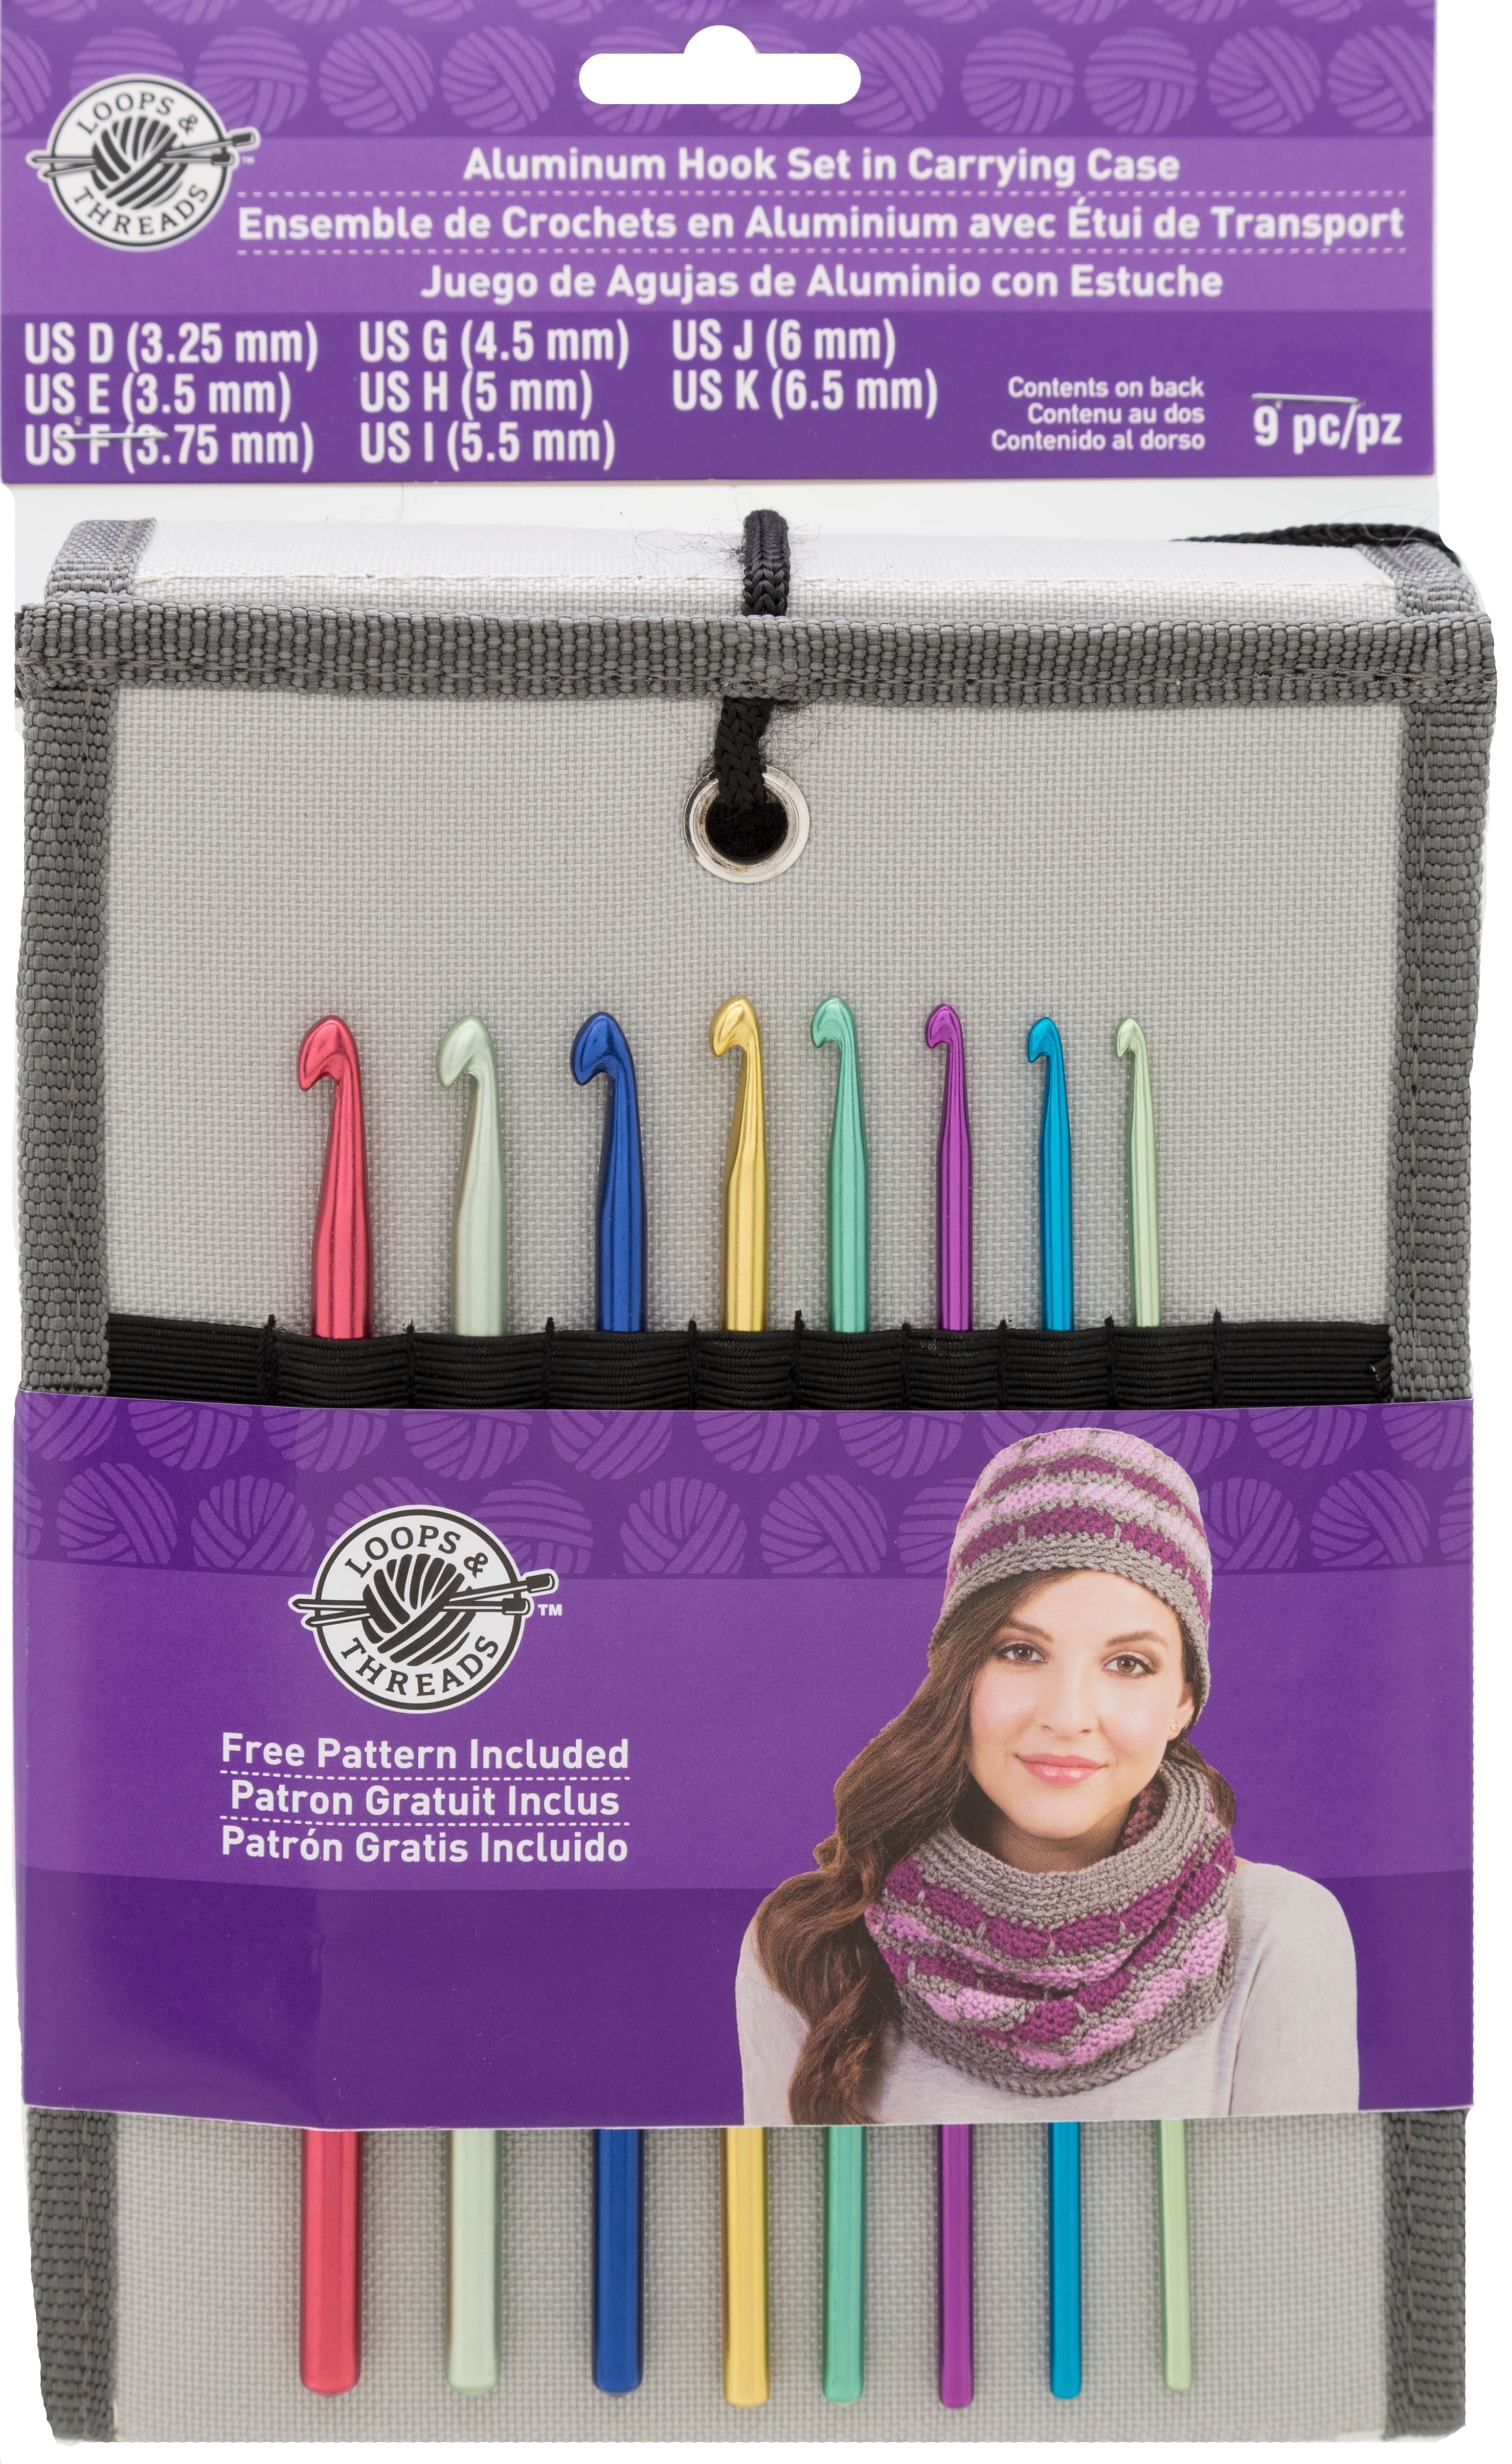 Aluminum Crochet Hook Set with Scissors by Loops & Threads | Michaels